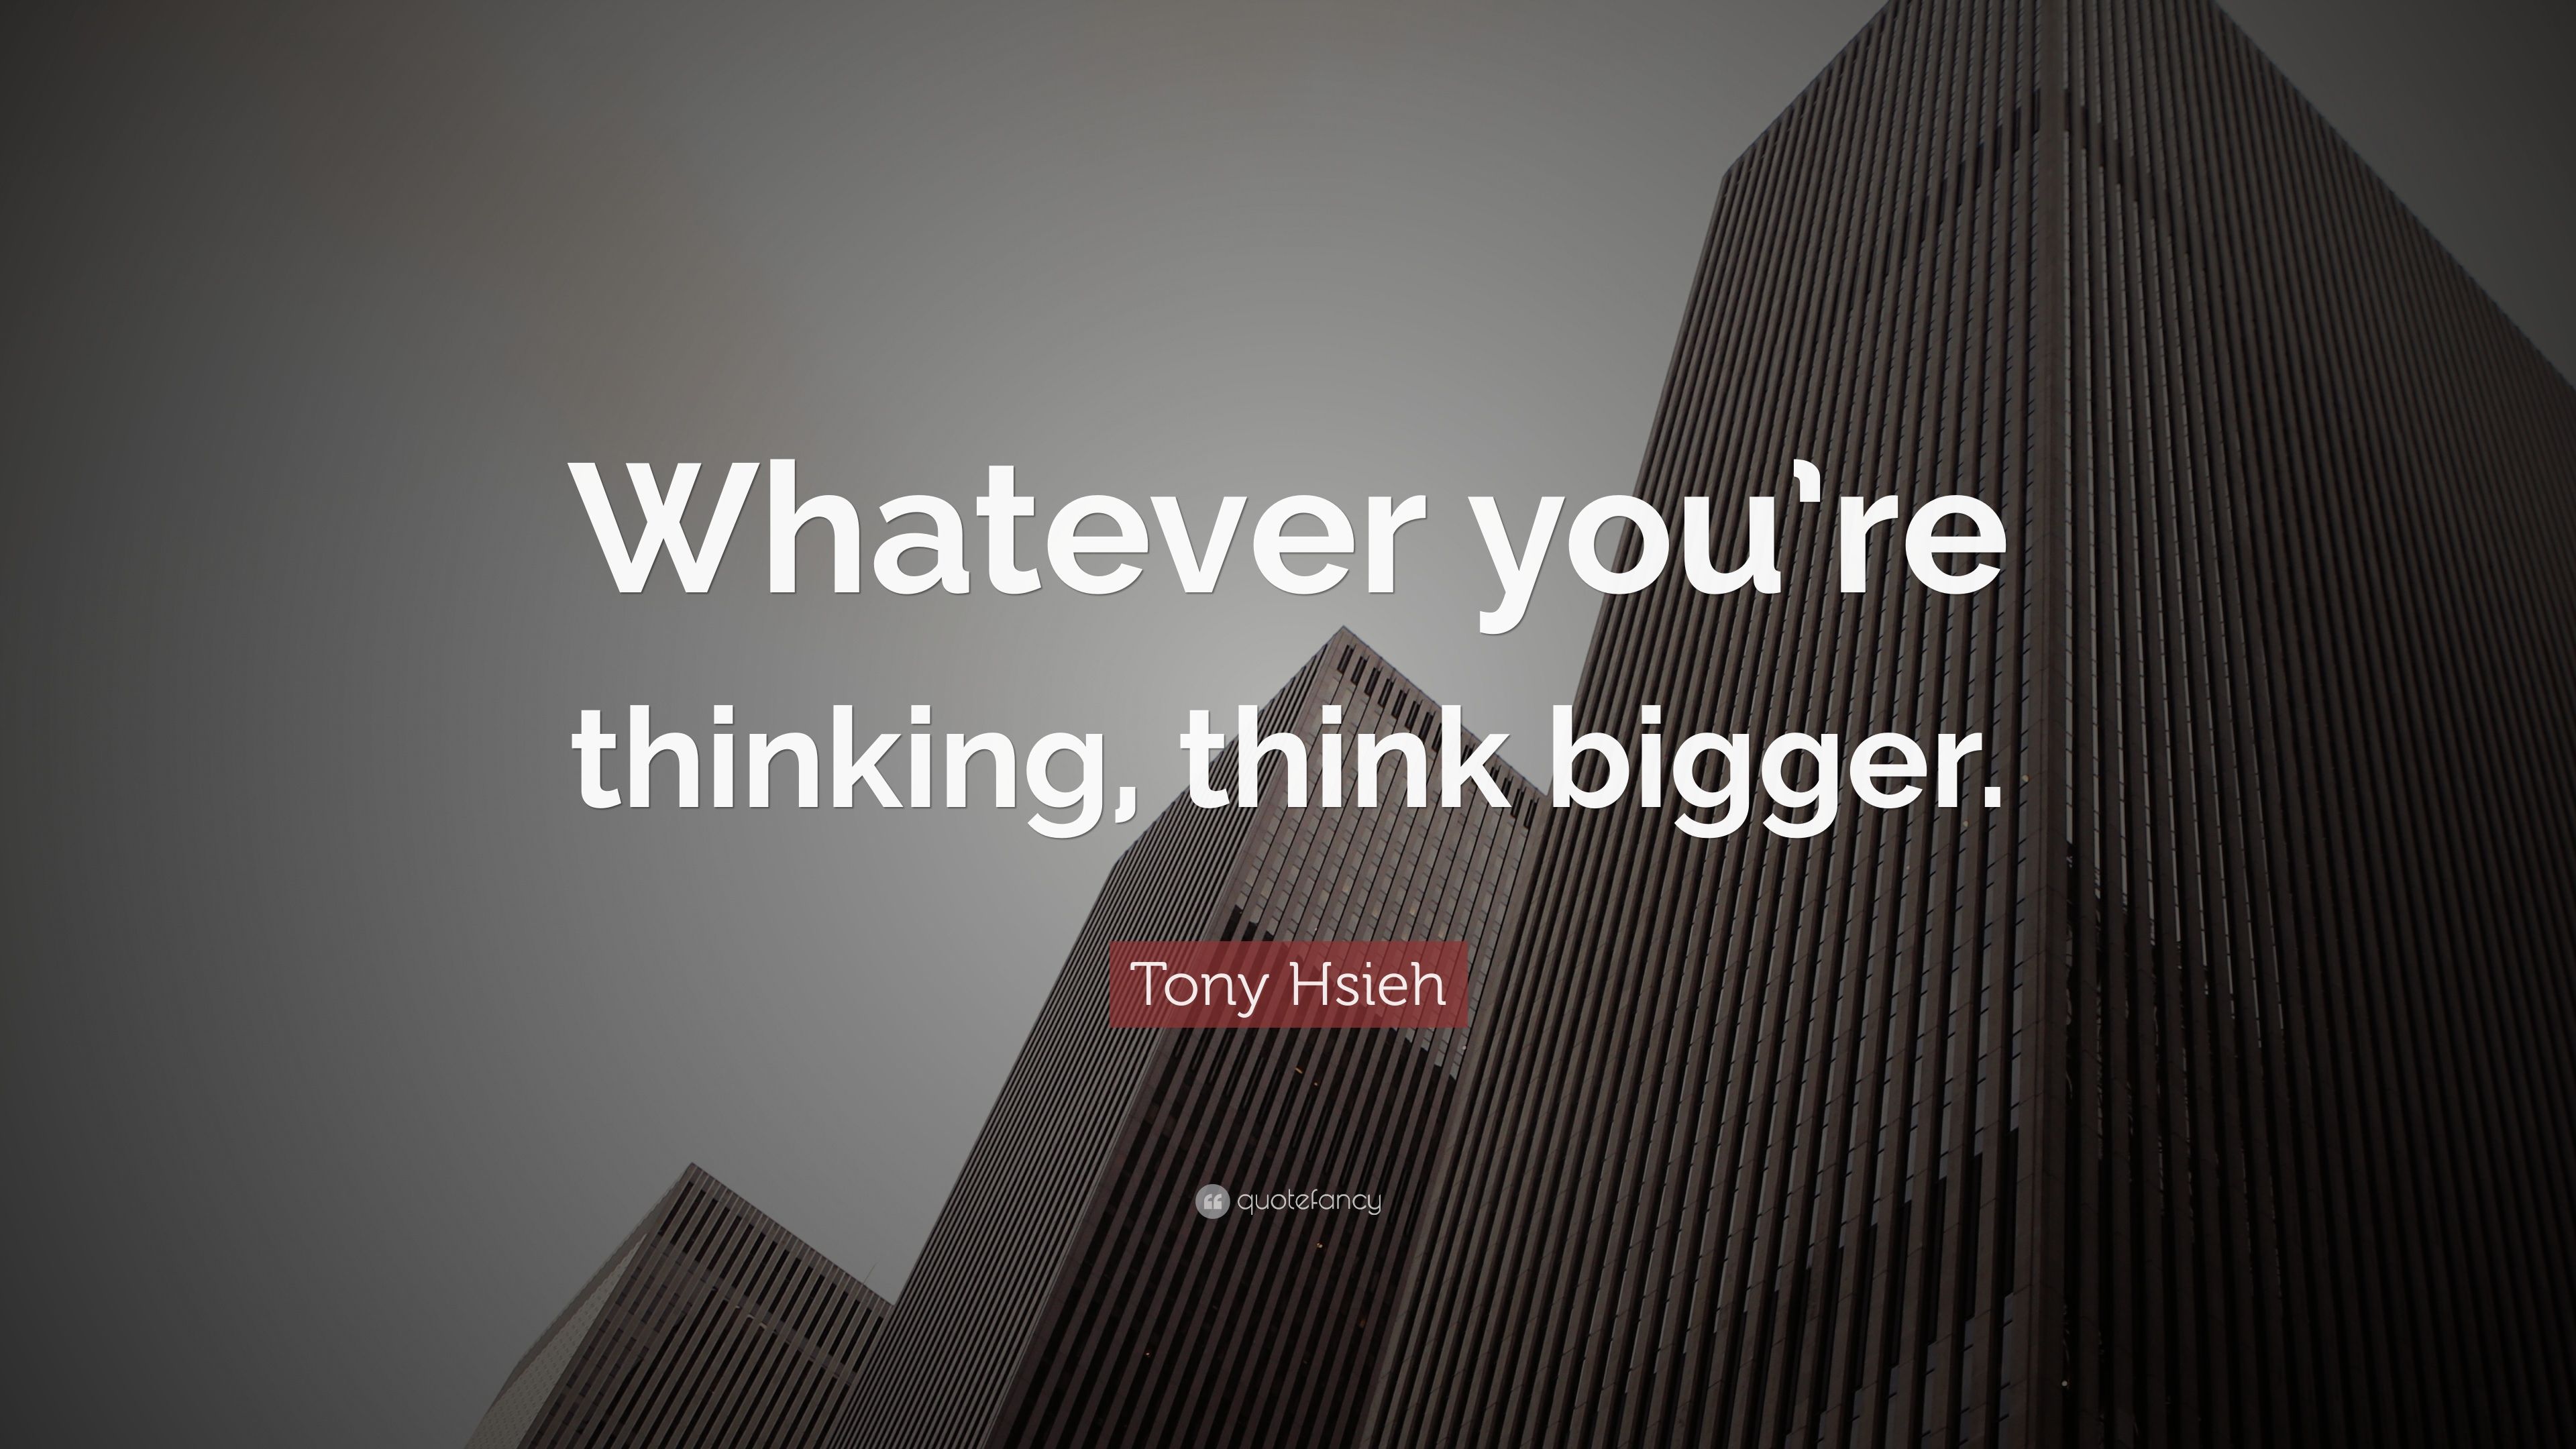 Tony Hsieh Quote Whatever youre thinking, think bigger. 14